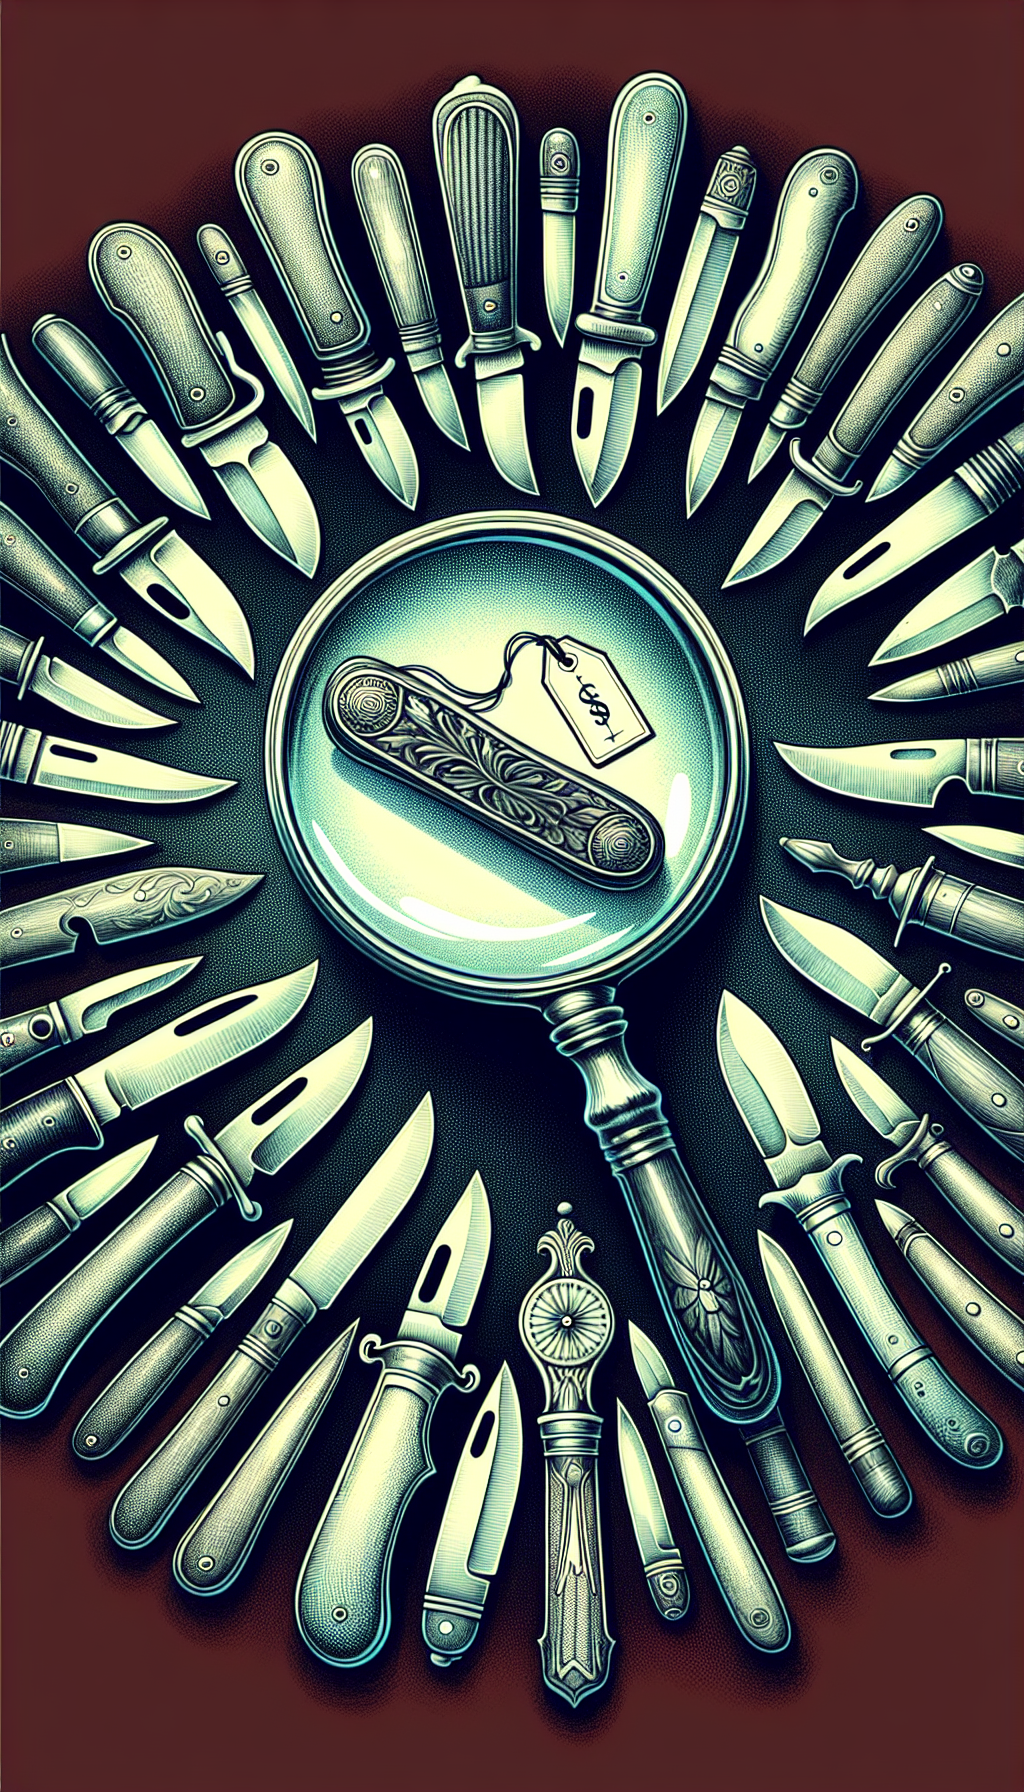 An illustration of an antique magnifying glass hovering over a diverse array of intricately designed old case knives, each glowing slightly to signify their unique features and rarity. One knife is prominently displayed with a price tag showing a high value, subtly hinting at its exceptional worth among its peers, encapsulating the marriage between rarity and value in vintage knife collecting.